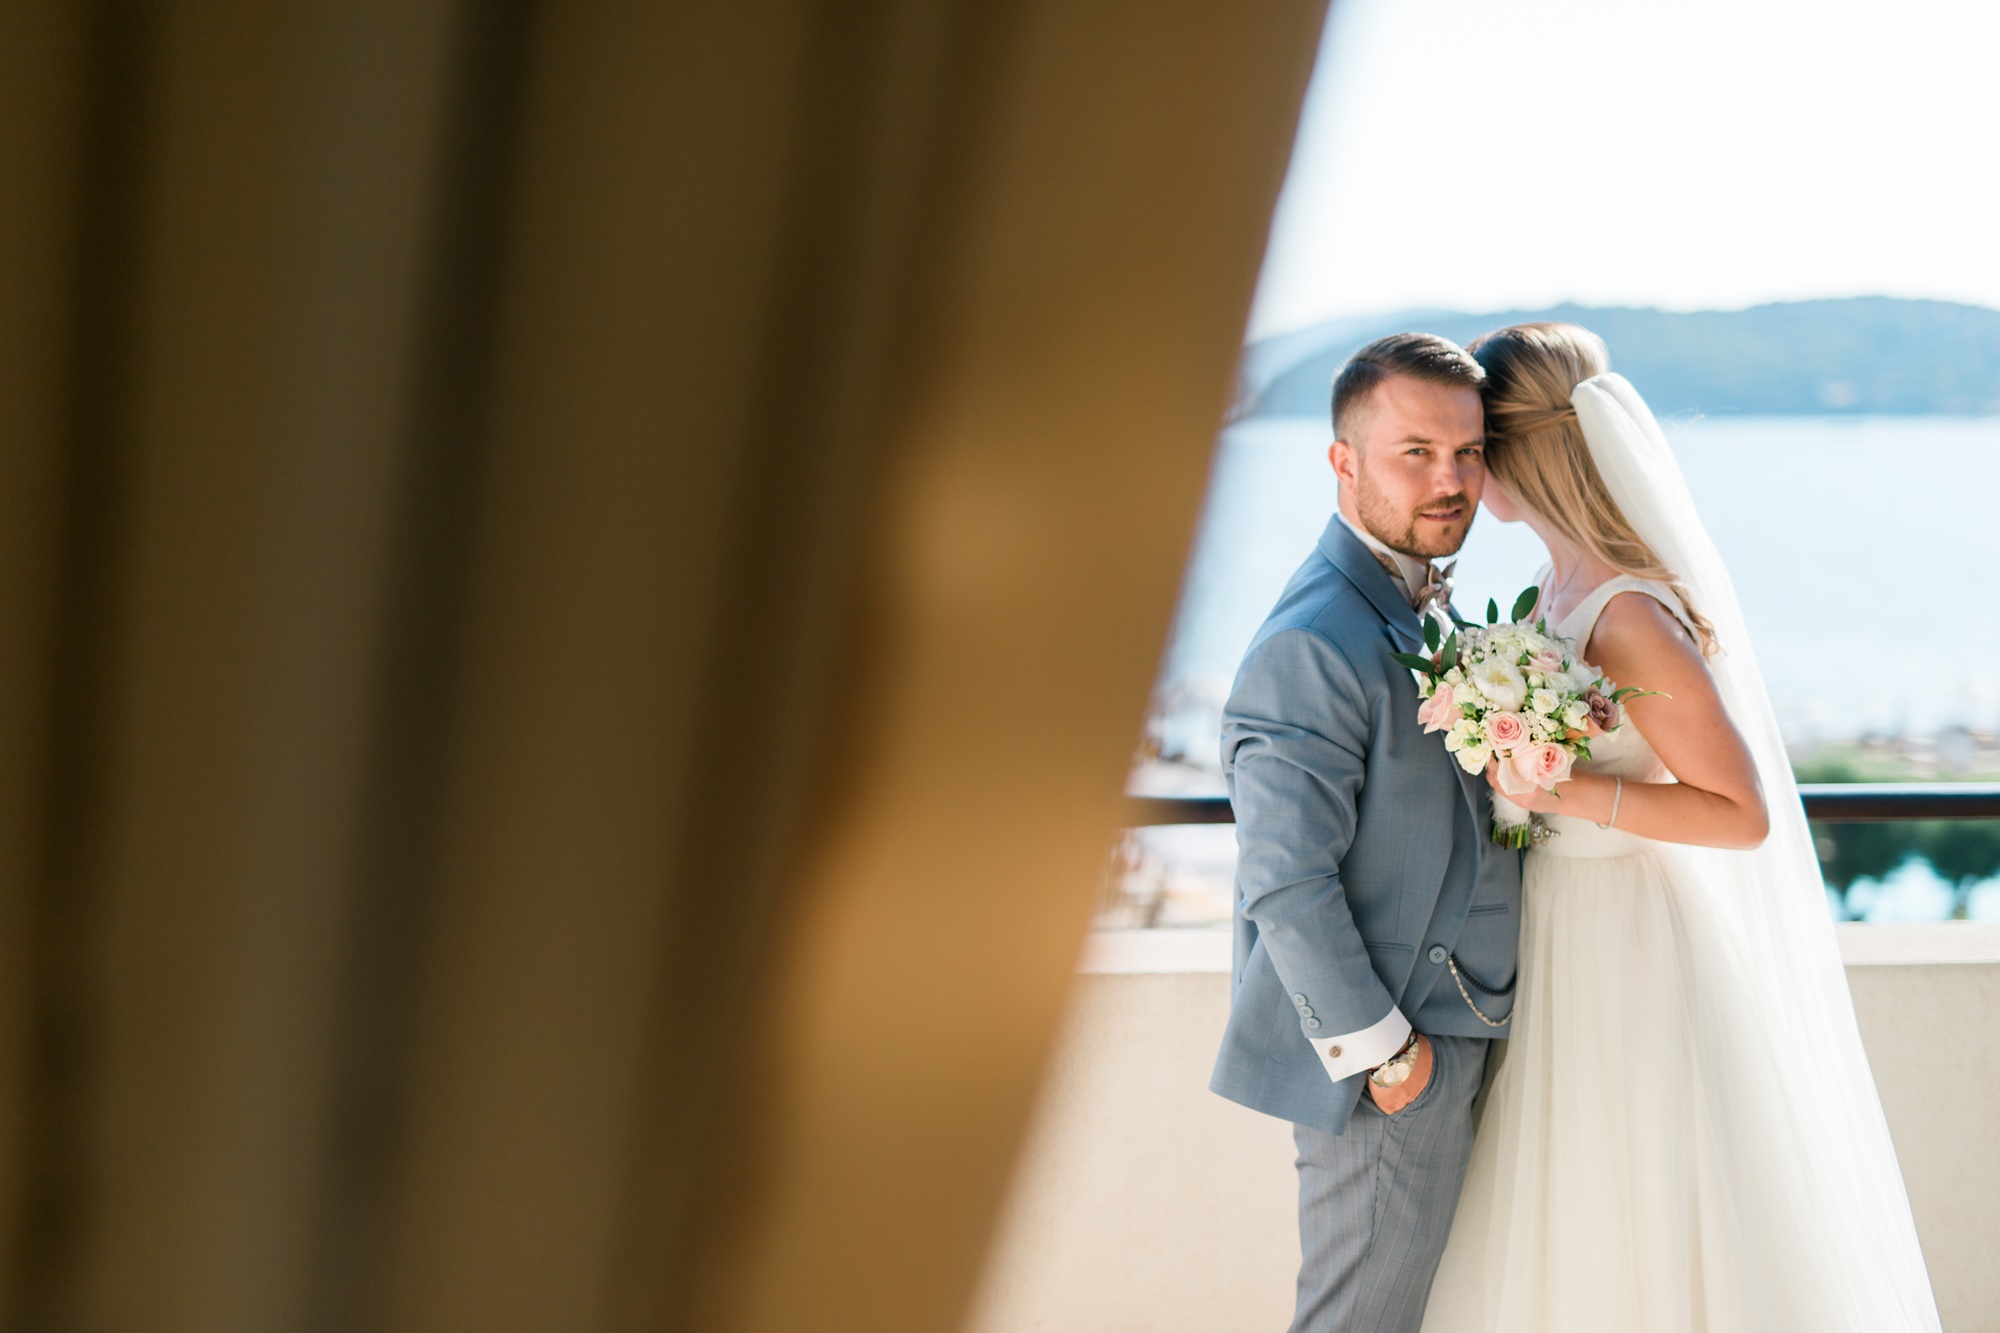 Summer wedding in Anavissos with pastel colors